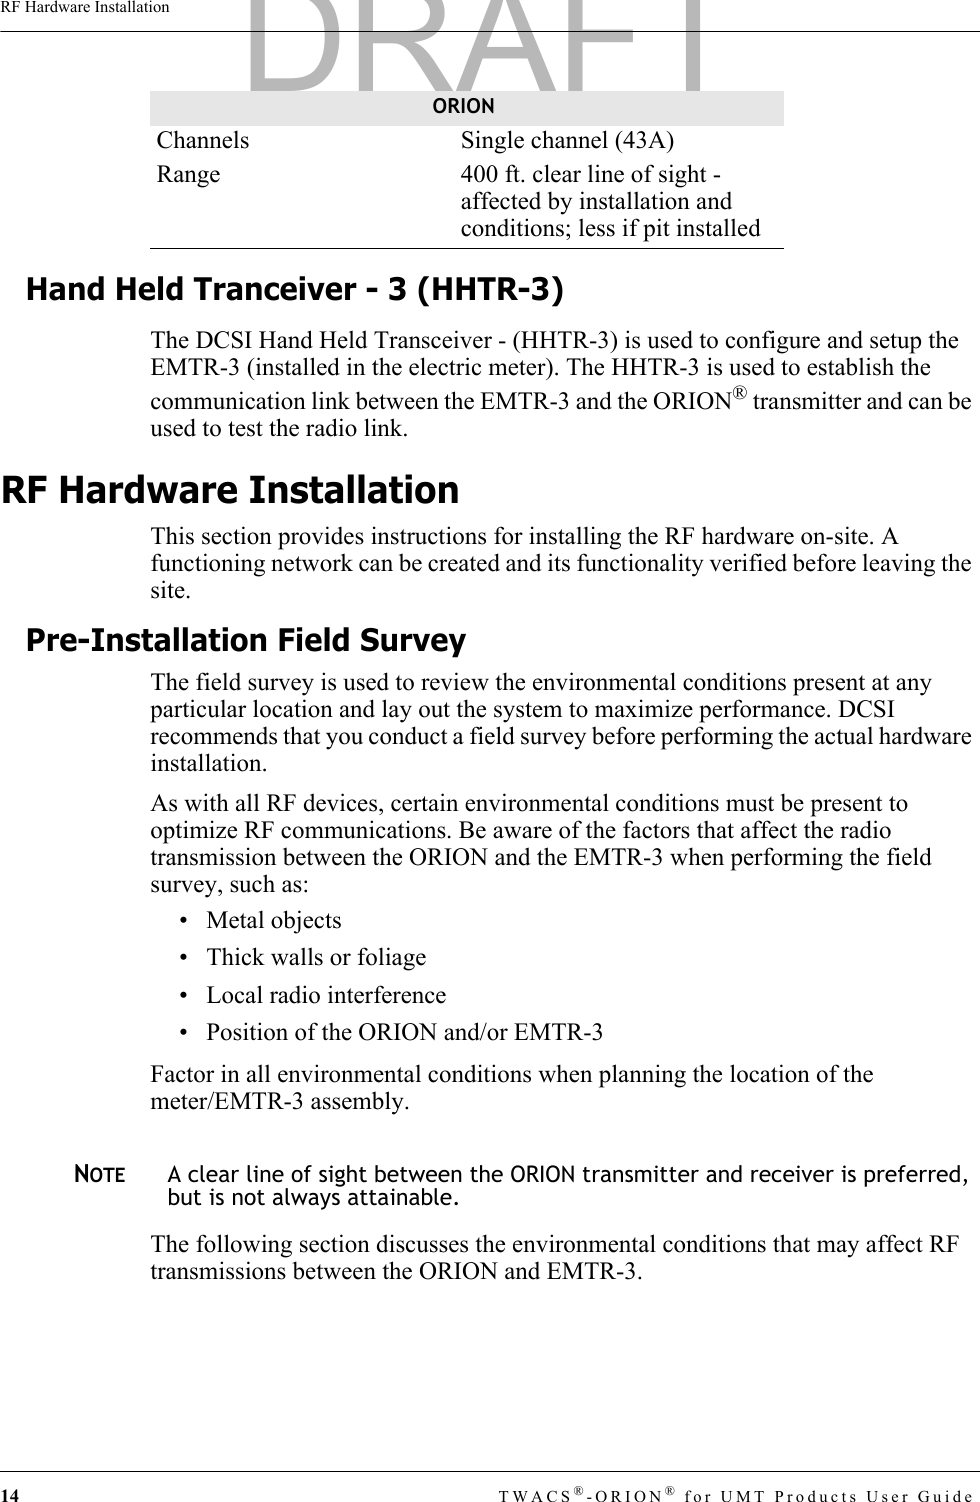 14 TWACS®-ORION® for UMT Products User GuideRF Hardware InstallationHand Held Tranceiver - 3 (HHTR-3)The DCSI Hand Held Transceiver - (HHTR-3) is used to configure and setup the EMTR-3 (installed in the electric meter). The HHTR-3 is used to establish the communication link between the EMTR-3 and the ORION® transmitter and can be used to test the radio link.RF Hardware InstallationThis section provides instructions for installing the RF hardware on-site. A functioning network can be created and its functionality verified before leaving the site. Pre-Installation Field SurveyThe field survey is used to review the environmental conditions present at any particular location and lay out the system to maximize performance. DCSI recommends that you conduct a field survey before performing the actual hardware installation. As with all RF devices, certain environmental conditions must be present to optimize RF communications. Be aware of the factors that affect the radio transmission between the ORION and the EMTR-3 when performing the field survey, such as:• Metal objects• Thick walls or foliage• Local radio interference• Position of the ORION and/or EMTR-3Factor in all environmental conditions when planning the location of the meter/EMTR-3 assembly.NOTEA clear line of sight between the ORION transmitter and receiver is preferred, but is not always attainable.The following section discusses the environmental conditions that may affect RF transmissions between the ORION and EMTR-3. Channels  Single channel (43A)Range  400 ft. clear line of sight - affected by installation and conditions; less if pit installedORIONDRAFT